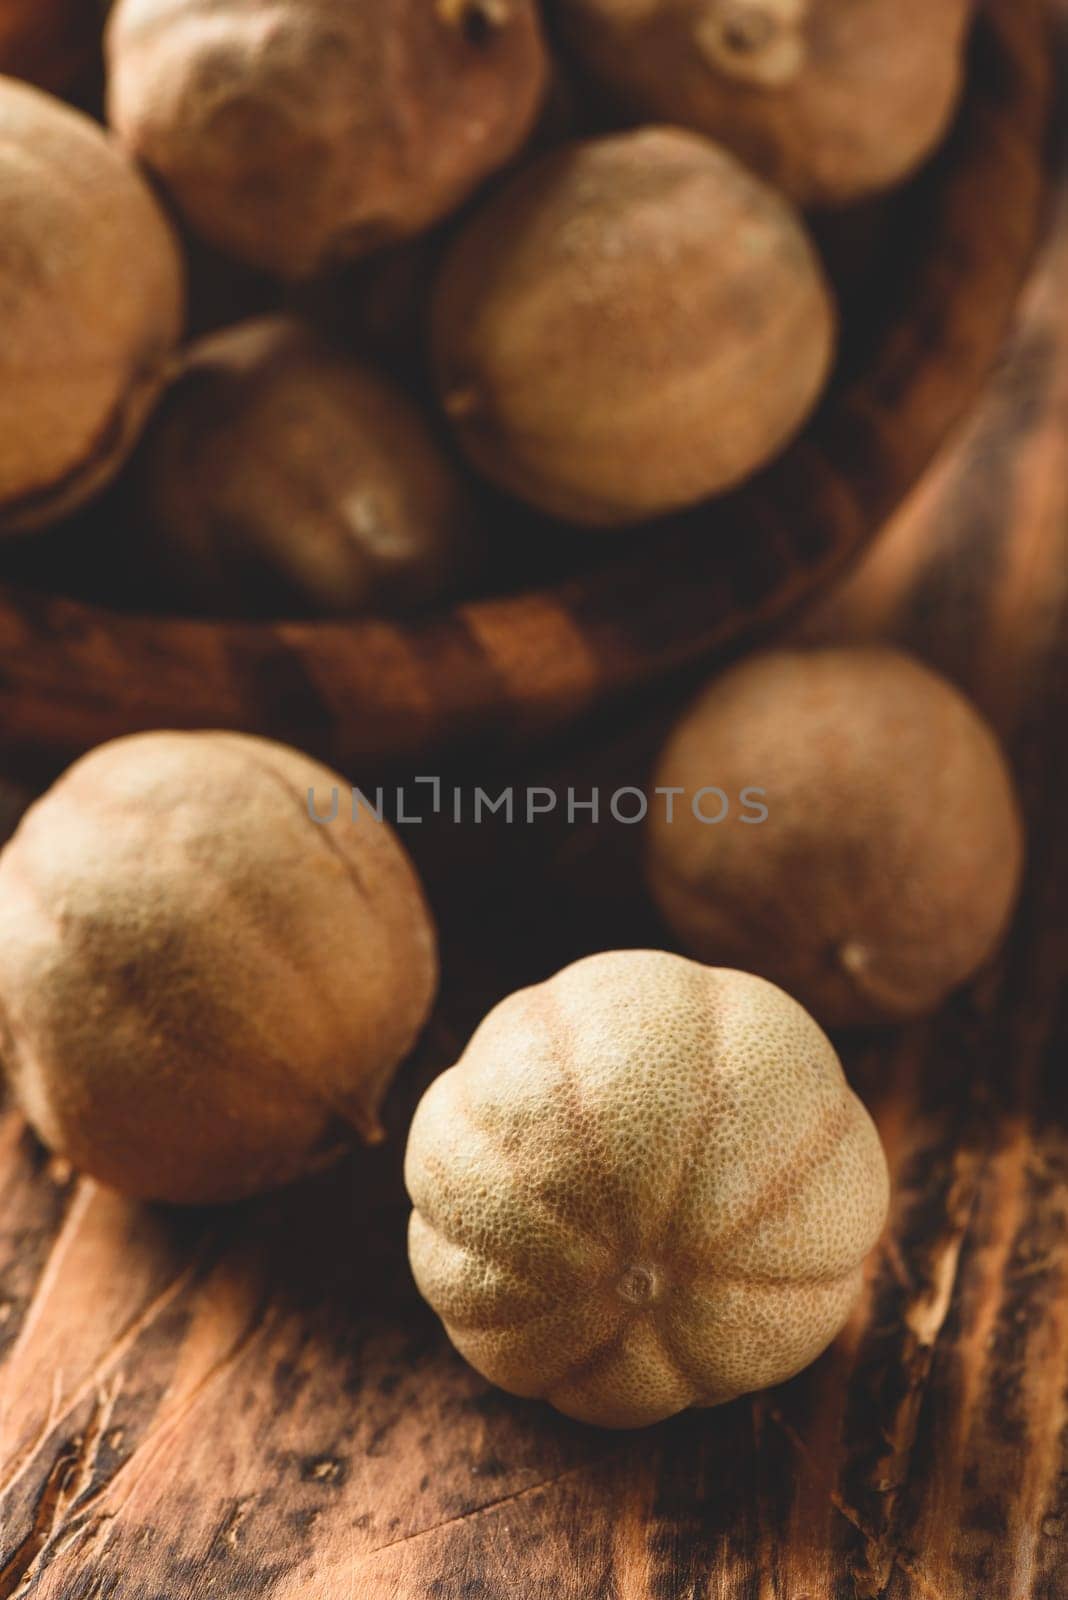 Dried limes on wooden table by Seva_blsv